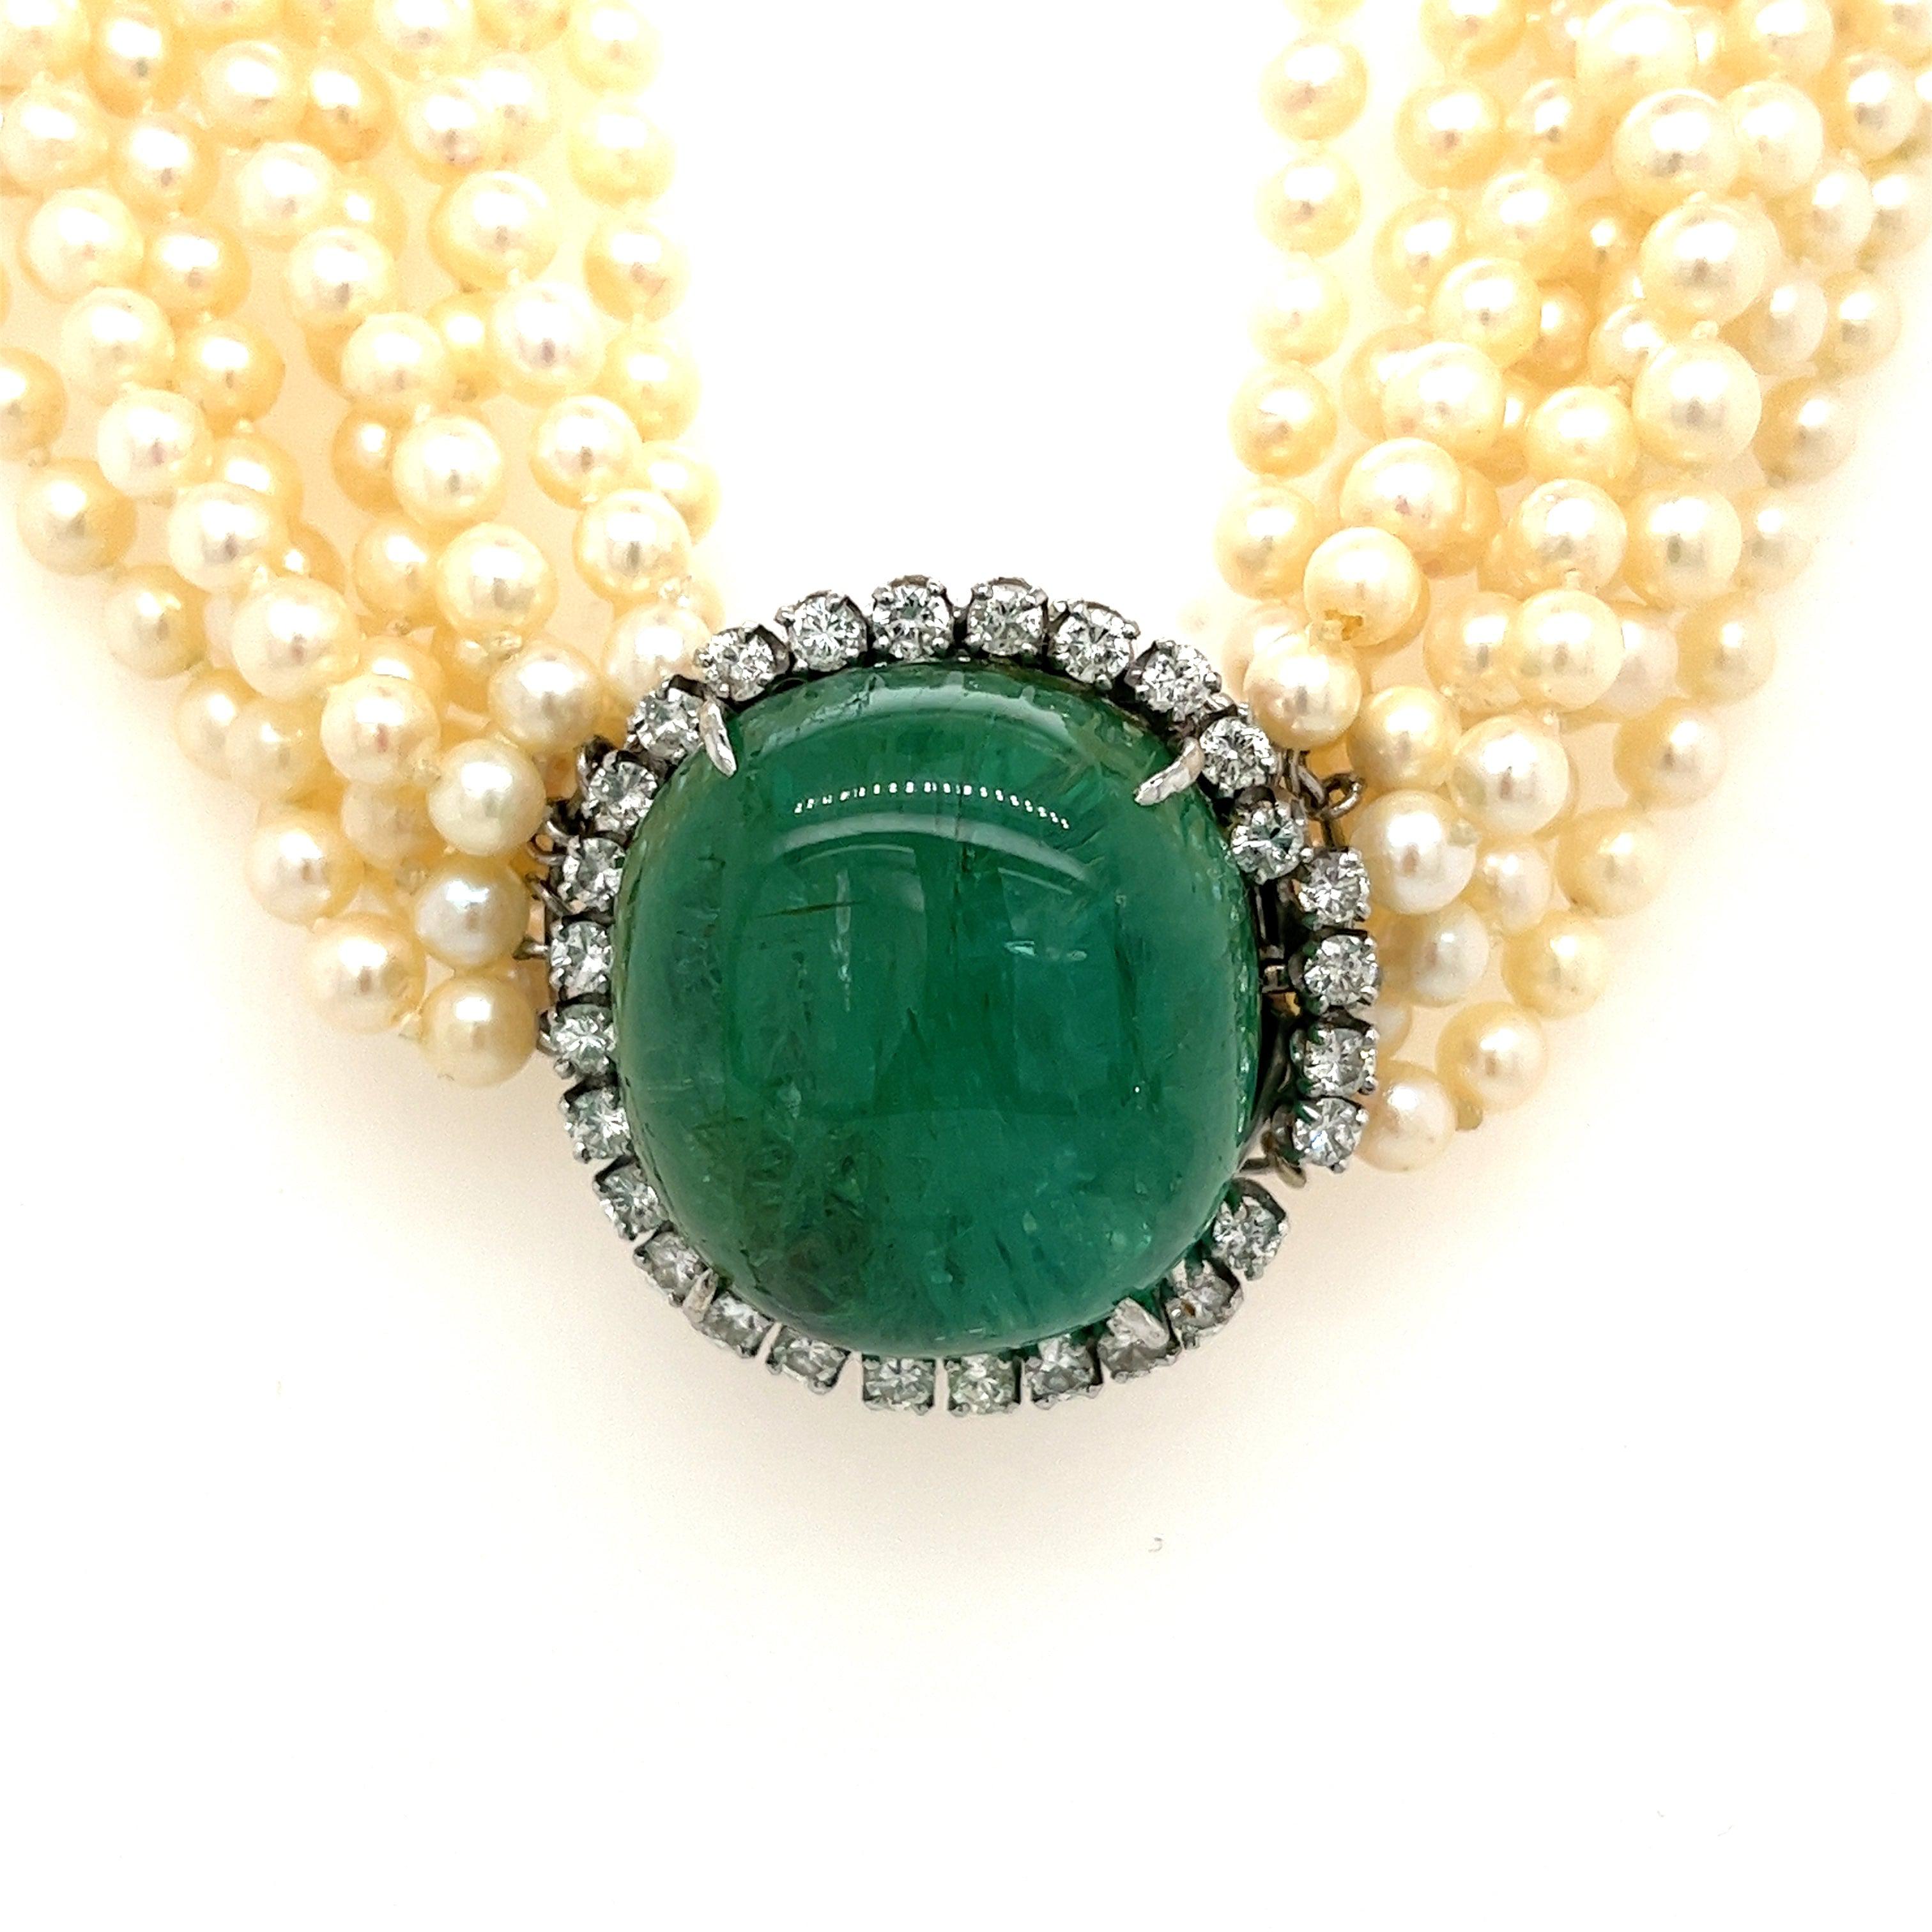 Vintage Cabochon Cut Emerald Center and Pearl Necklace | Retro & Art Deco Inspired-Necklaces-ASSAY